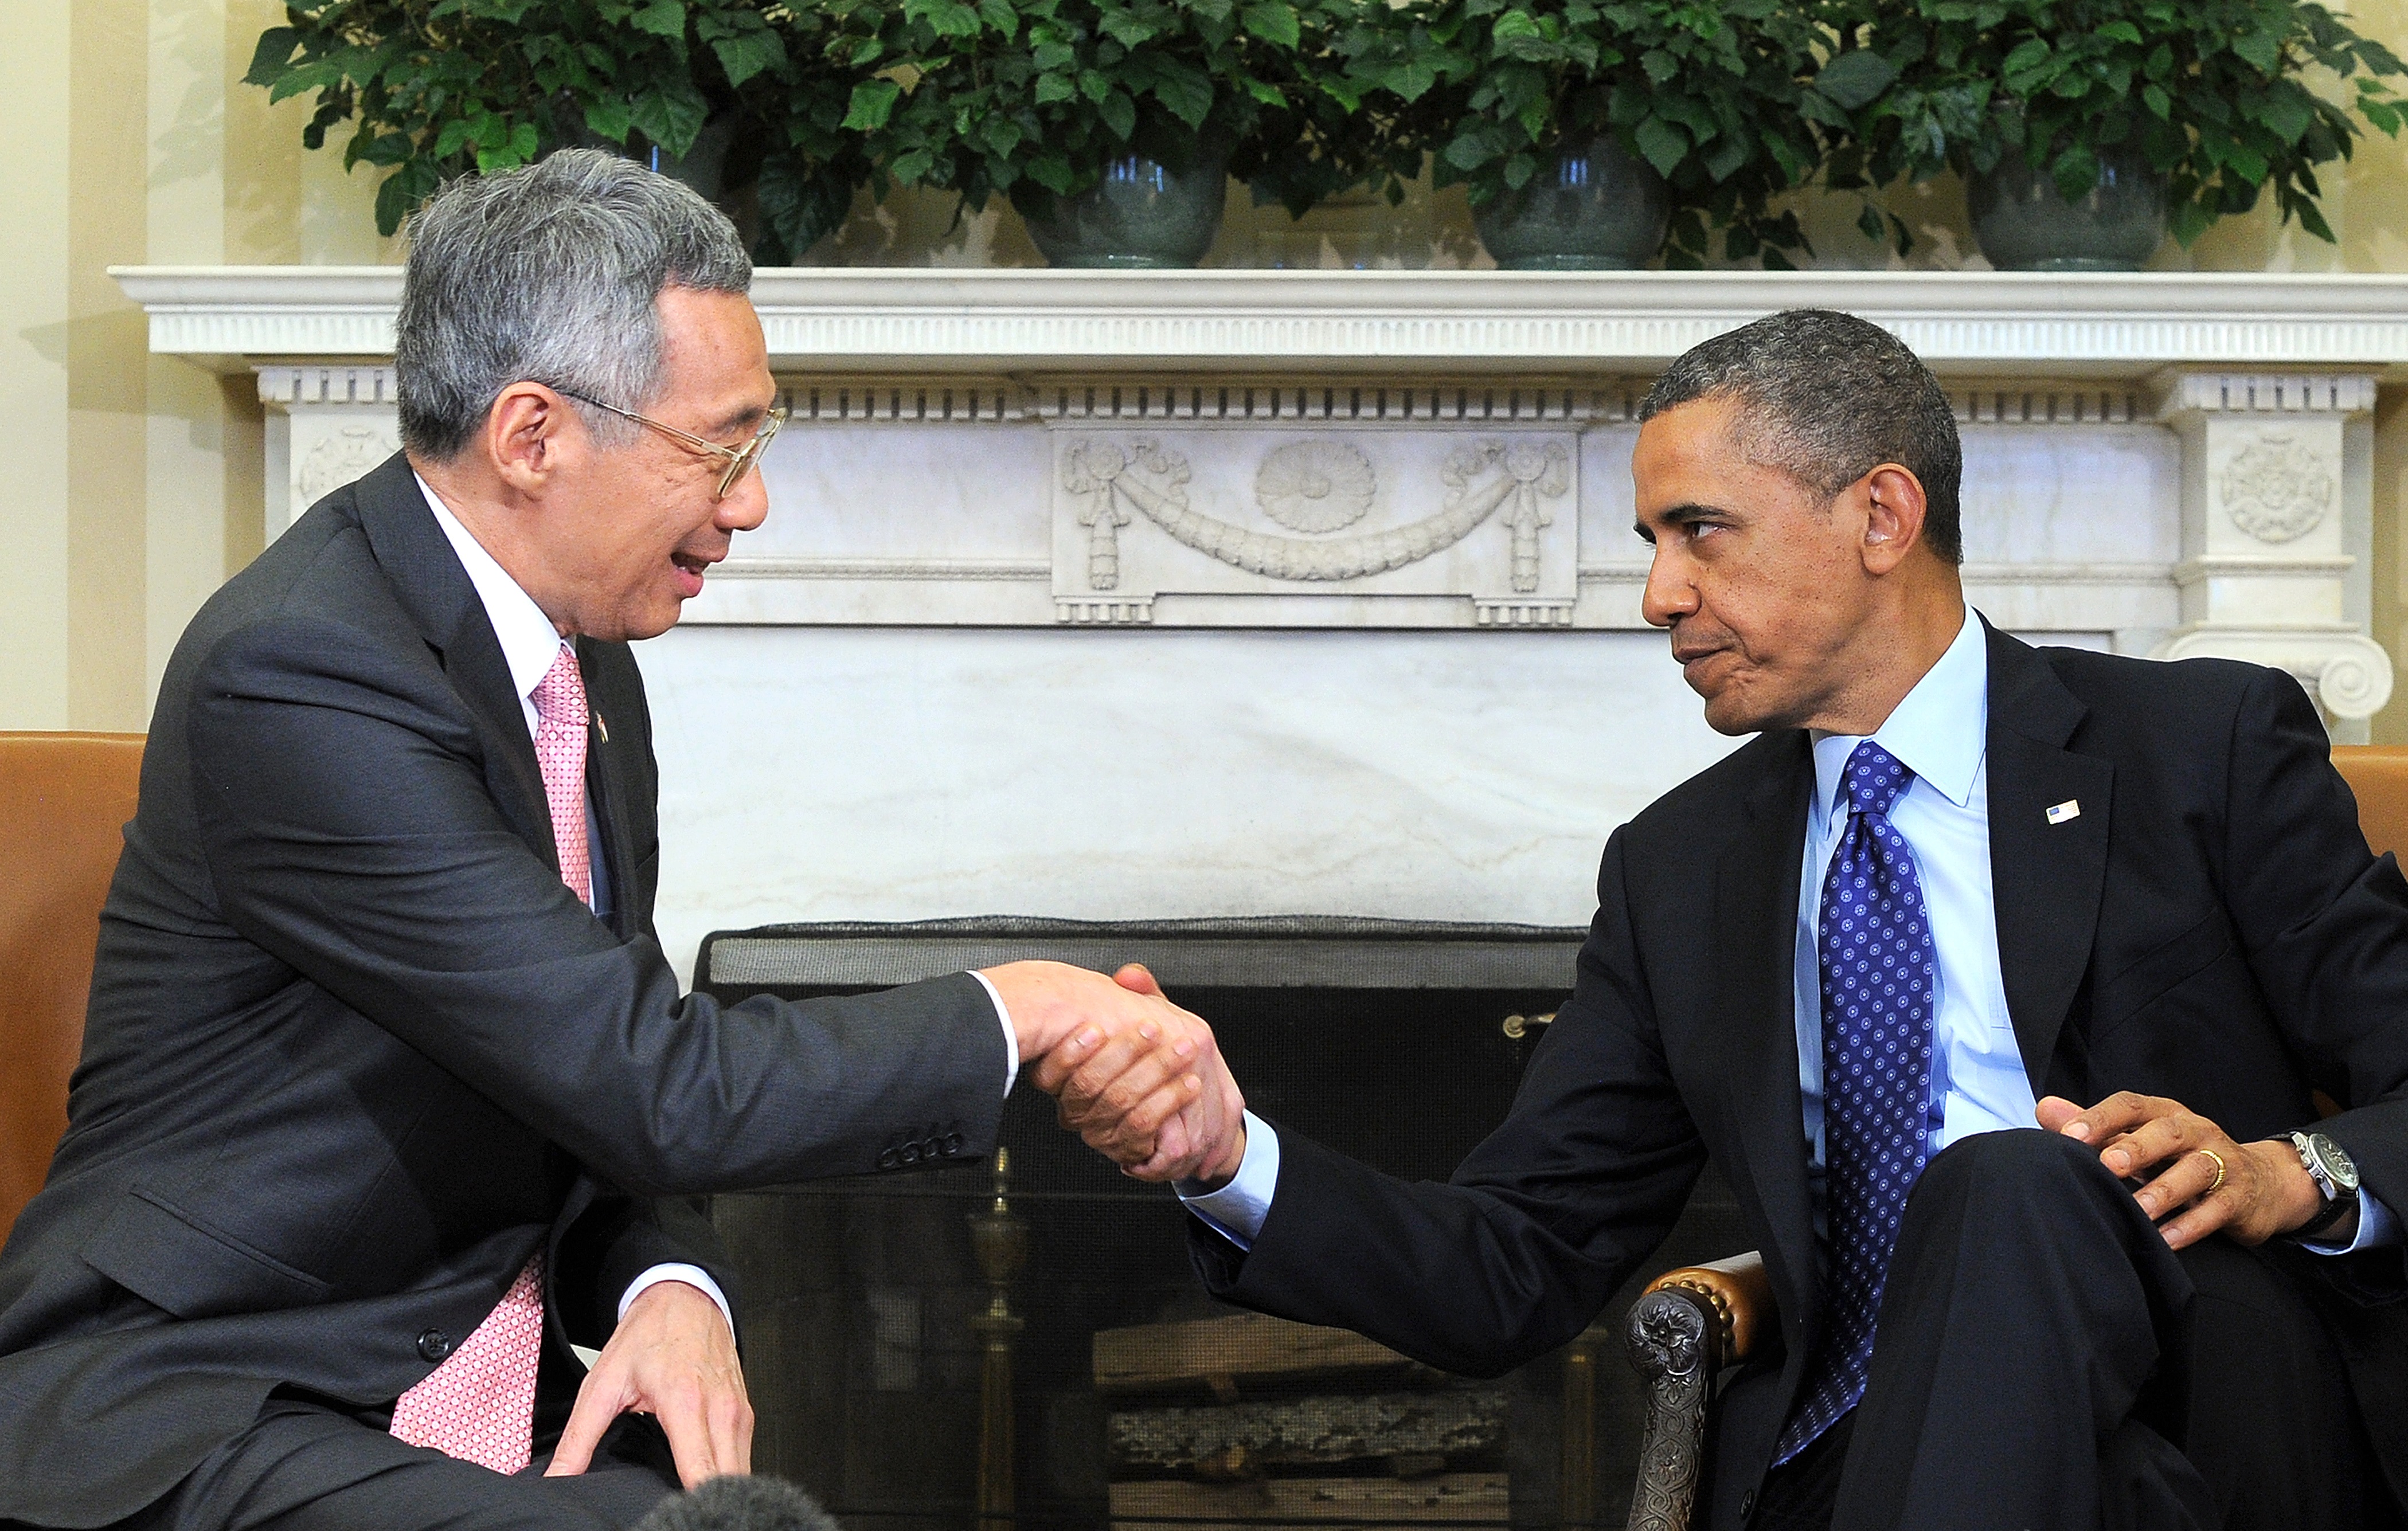 GettyImages-165265874-LHL-and-Obama.jpg